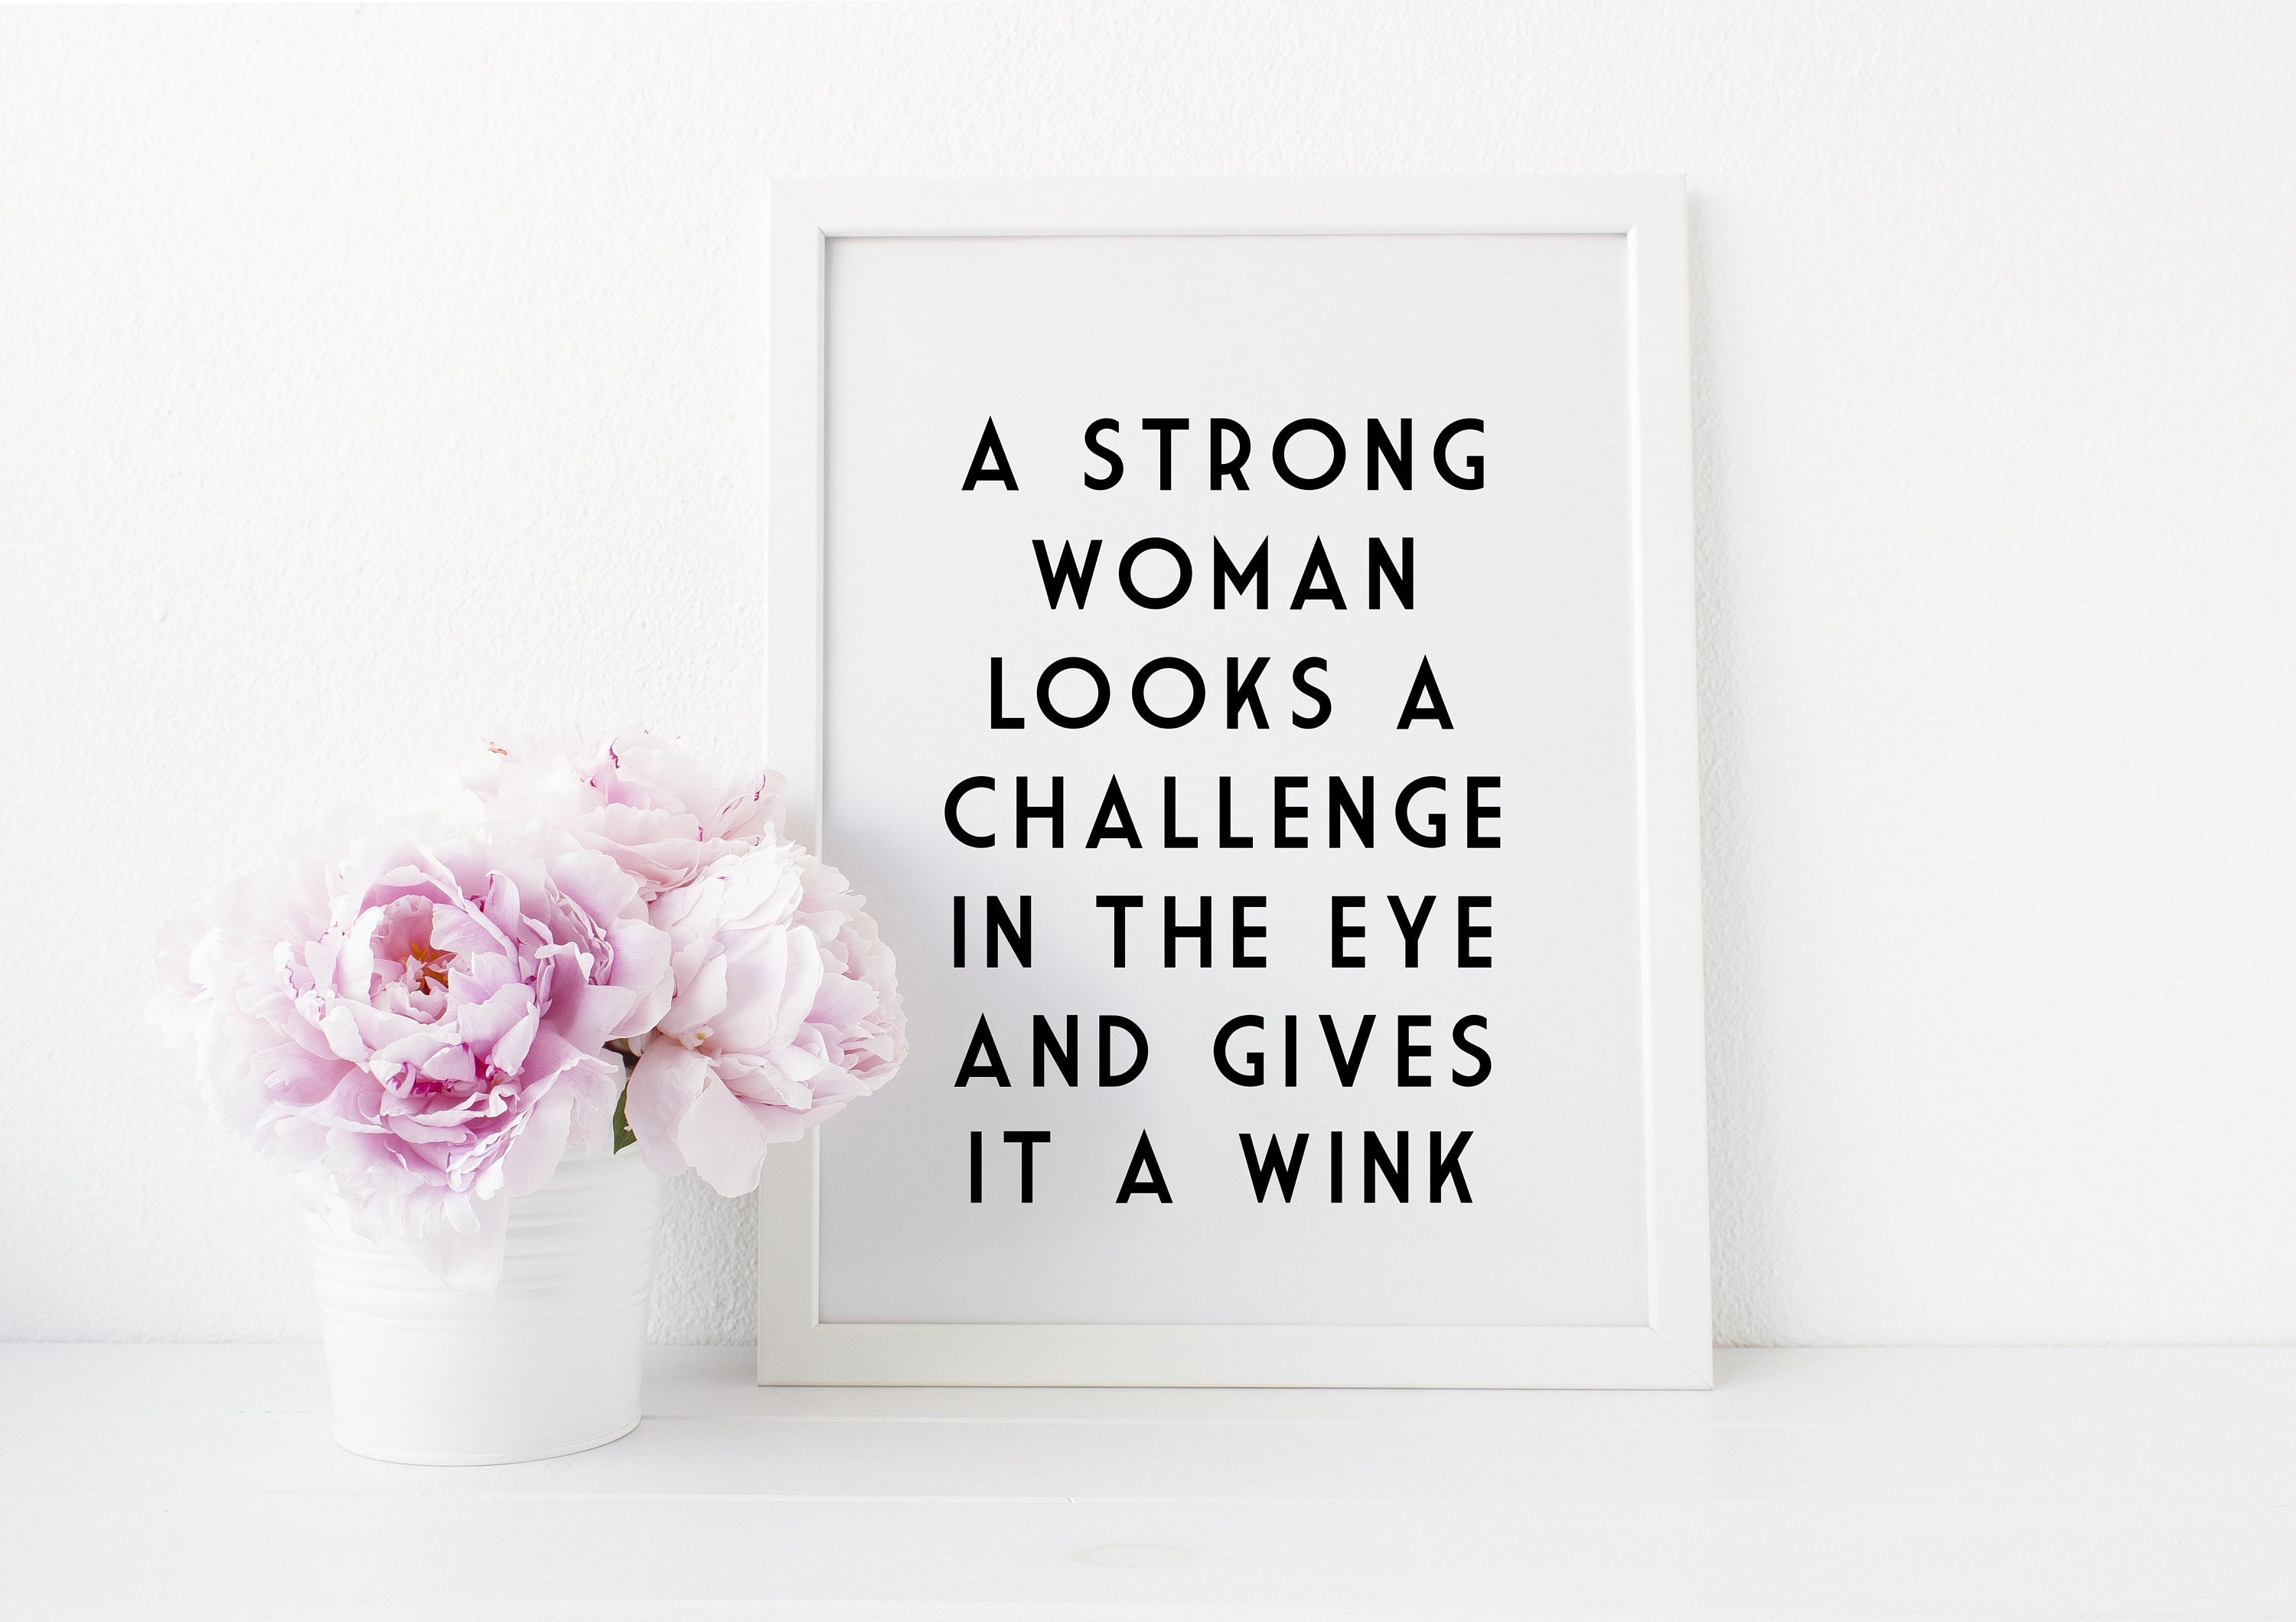 6. "A strong woman looks a challenge in the eye and gives it a wink" - wide 2